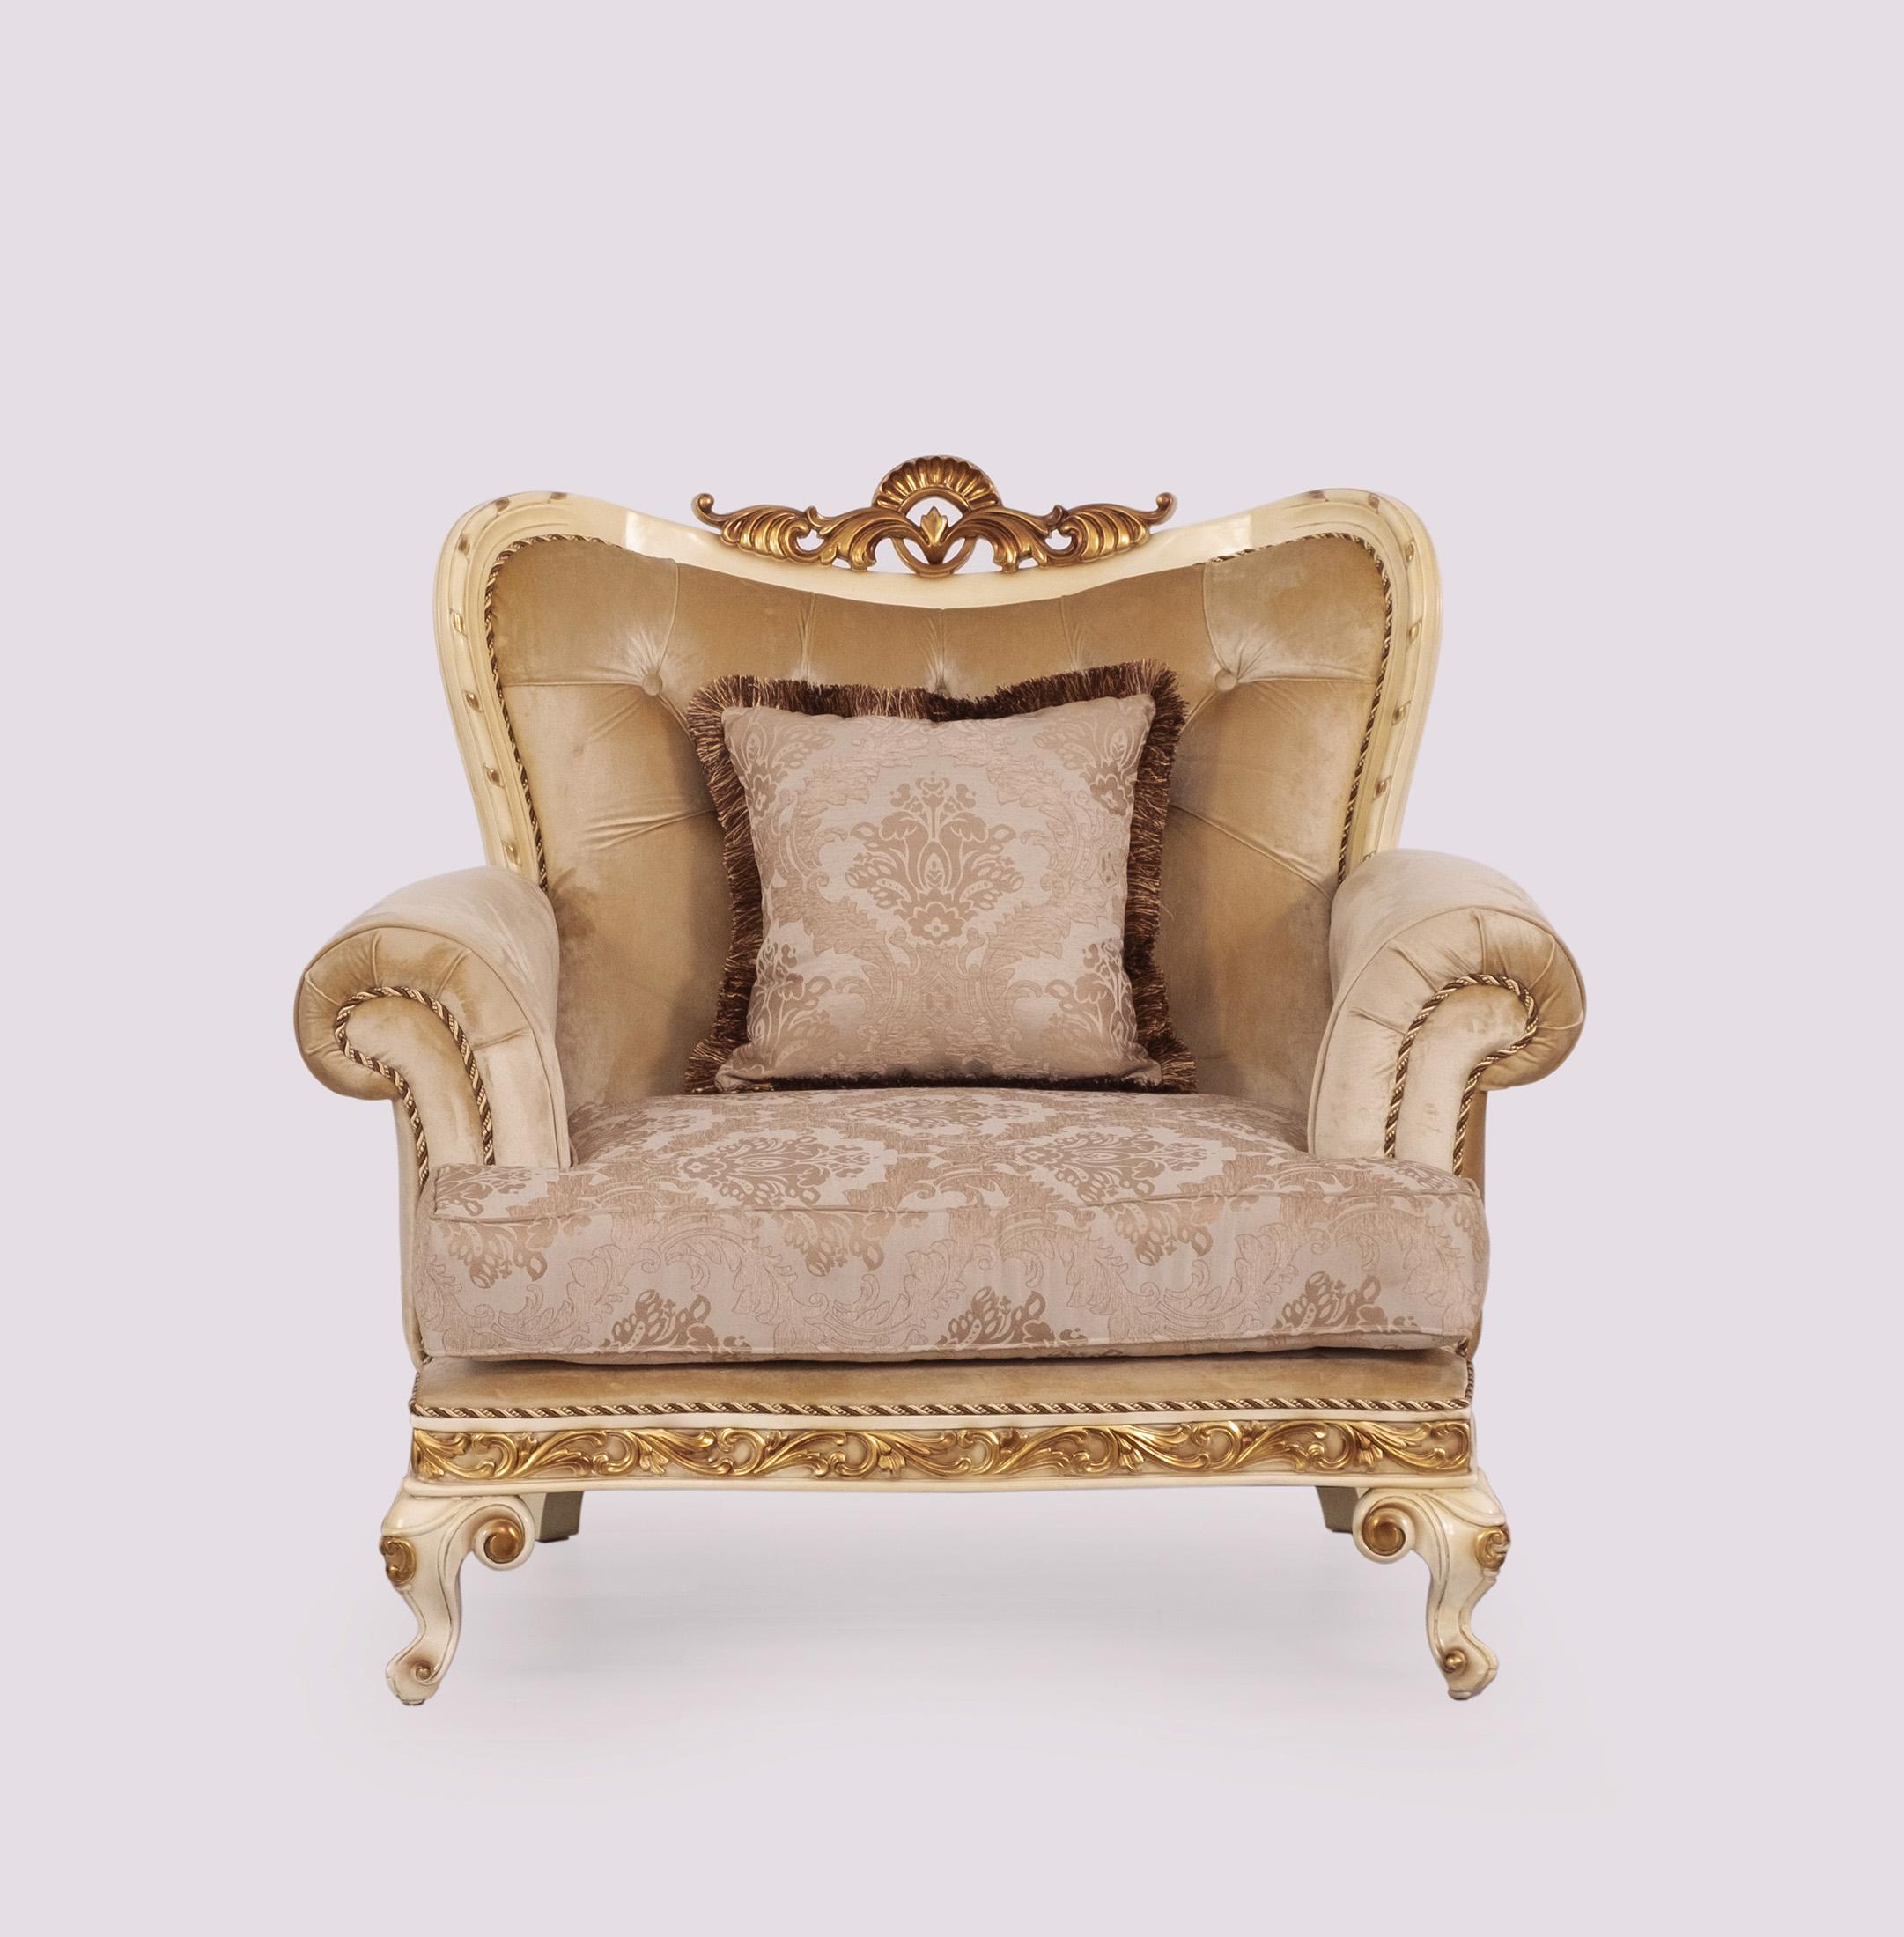 Classic, Traditional Arm Chair FANTASIA 40017-C in Sand, Gold, Beige Fabric